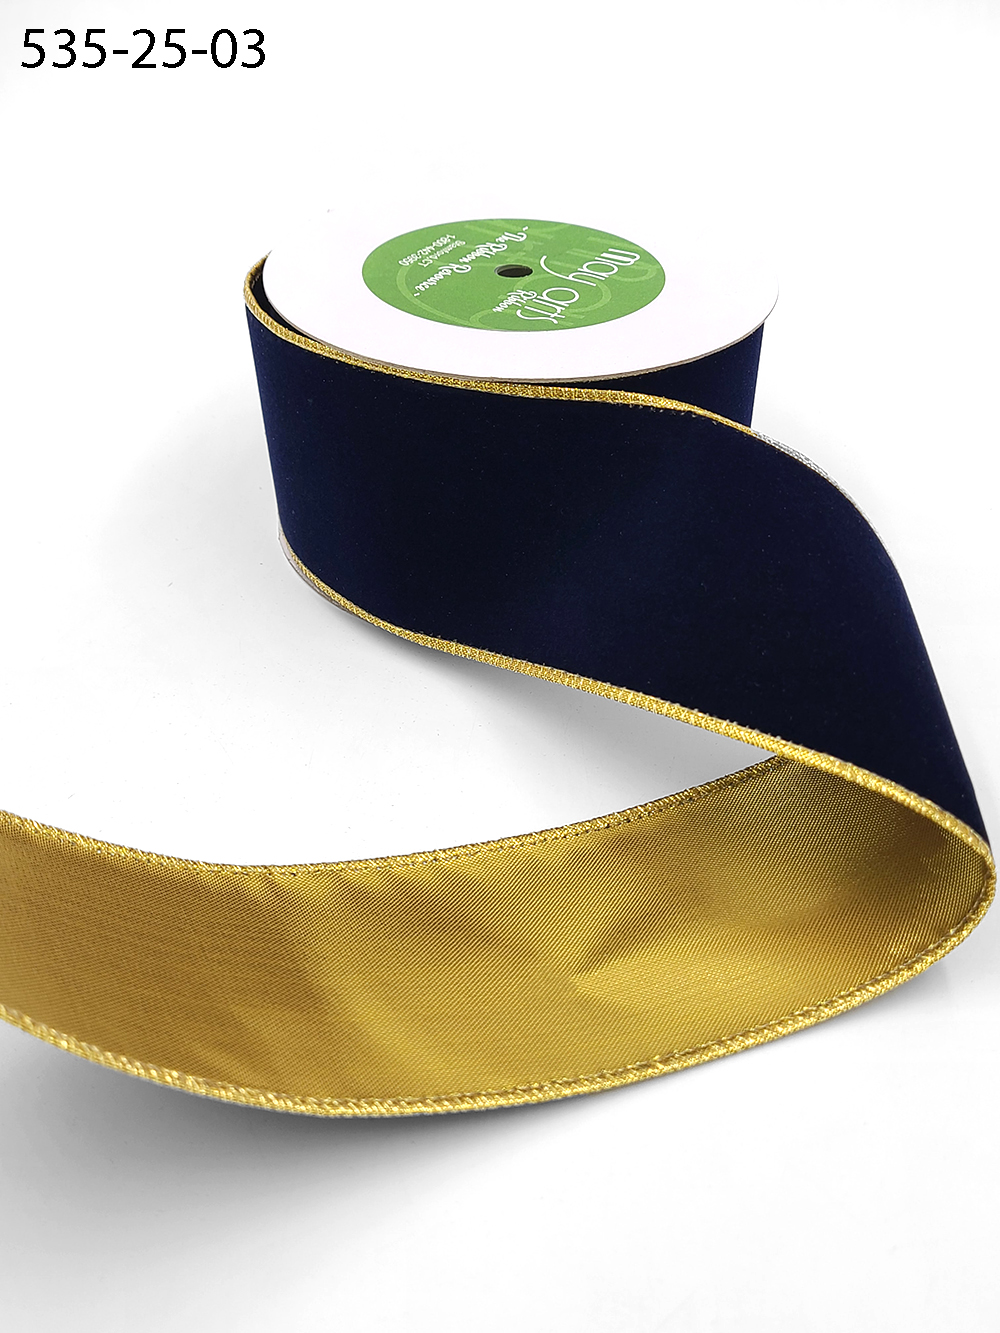 Wired Gold Velvet Ribbon 2.5 4' Wide BY THE YARD 